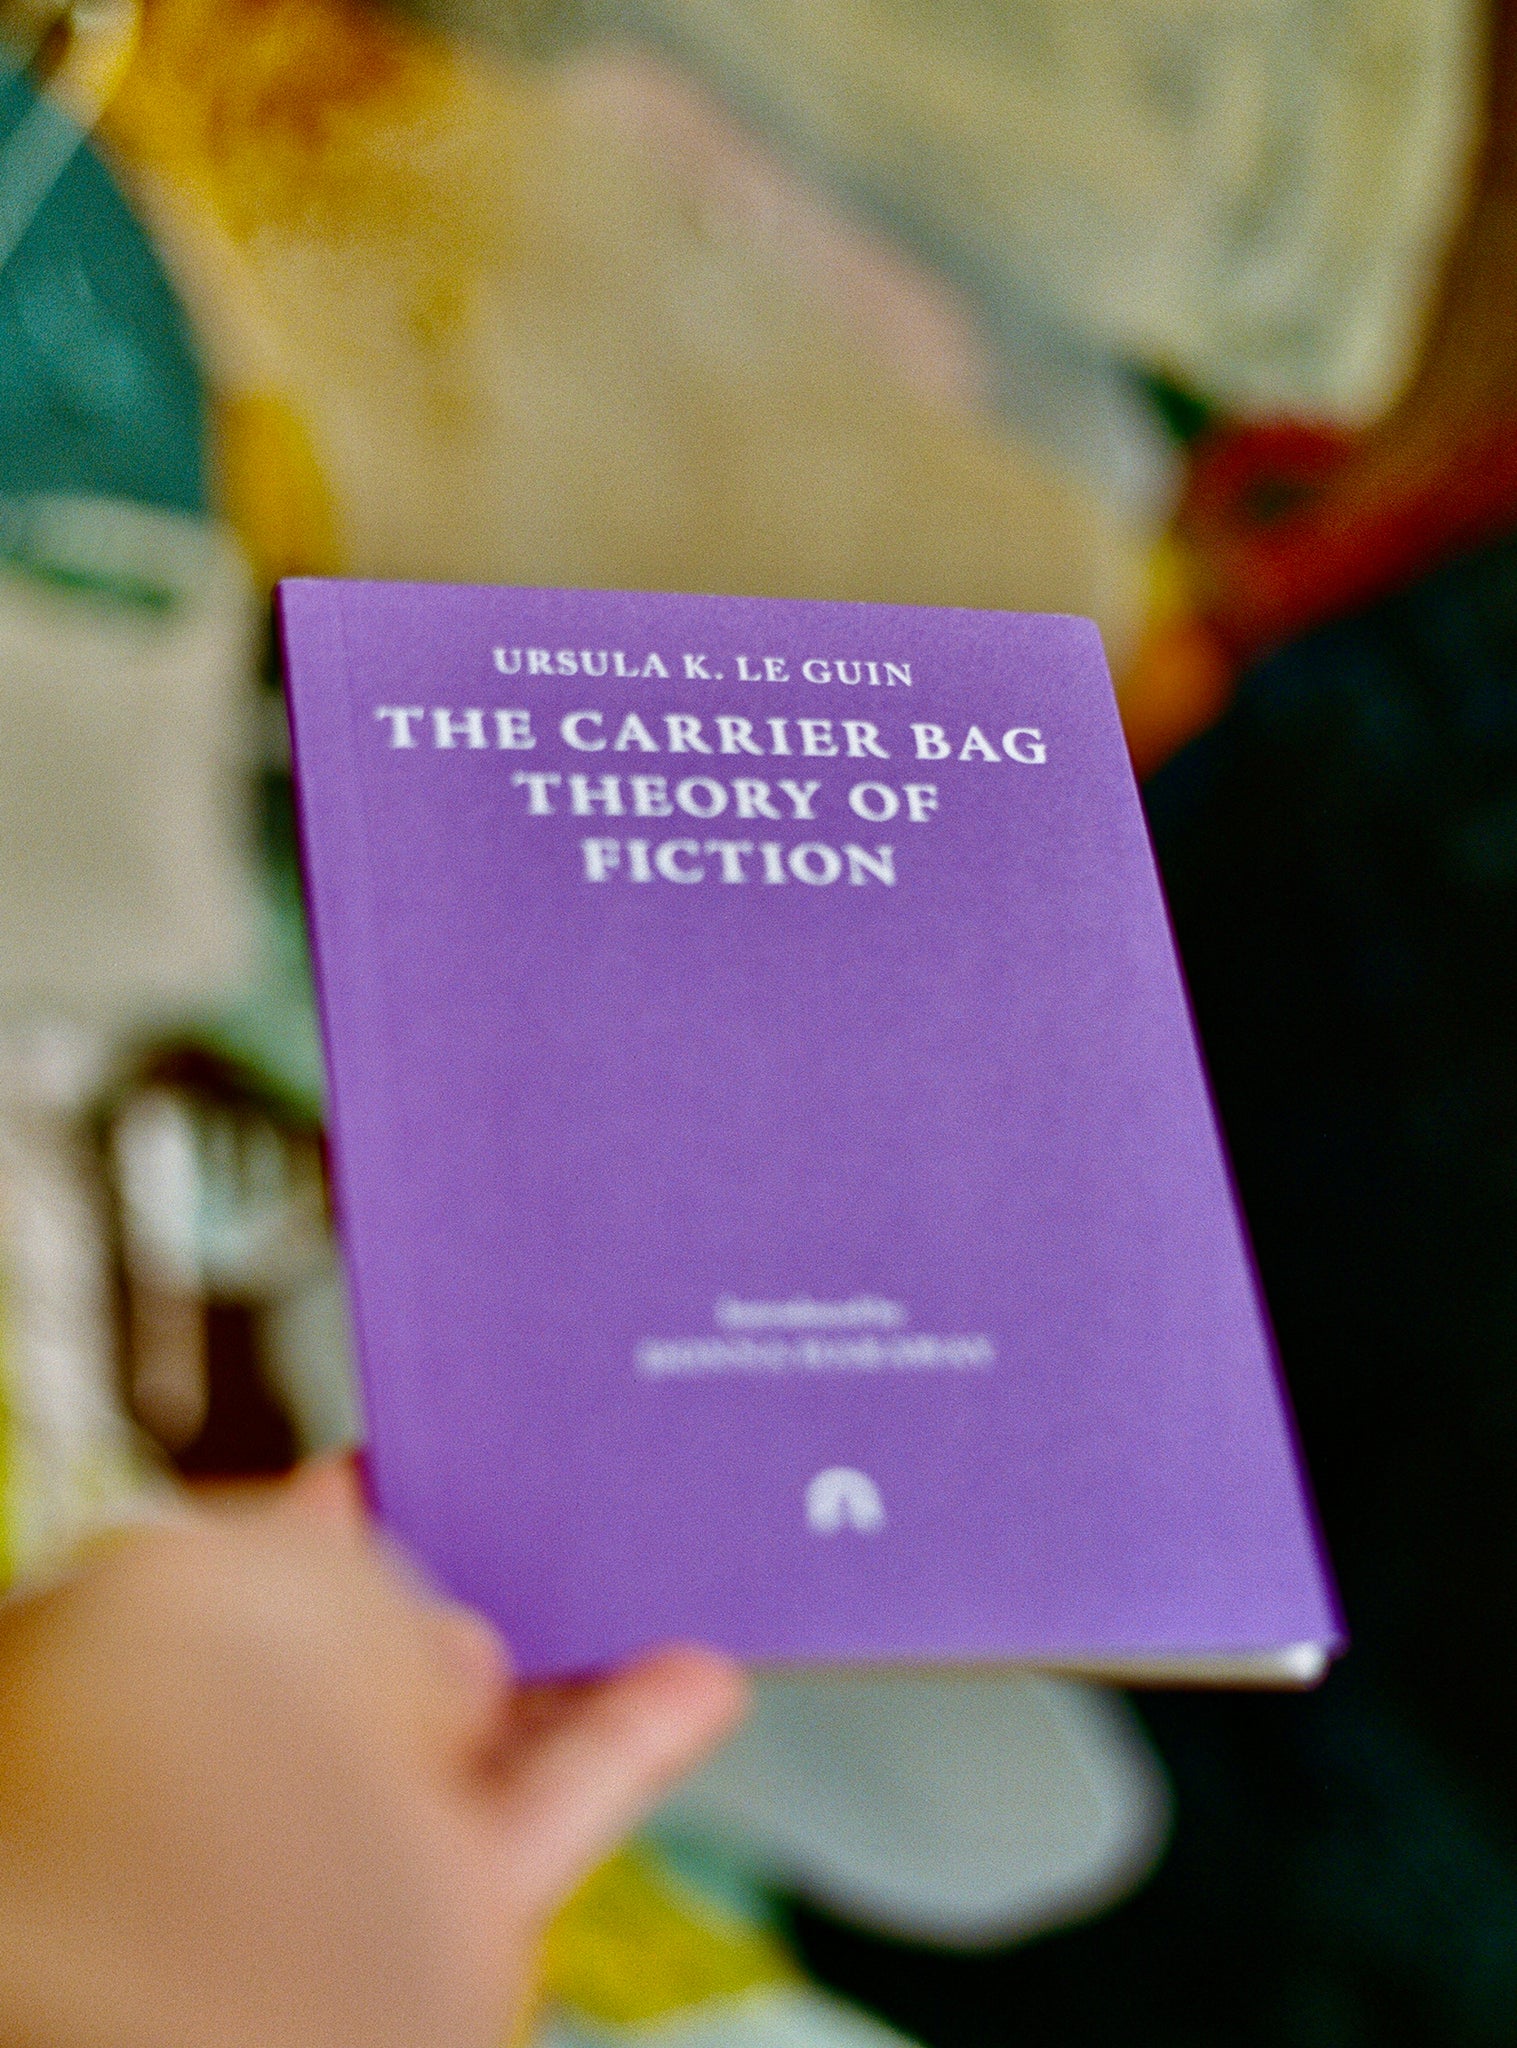 THE CARRIER BAG THEORY OF FICTION By Ursula K. Le Guin